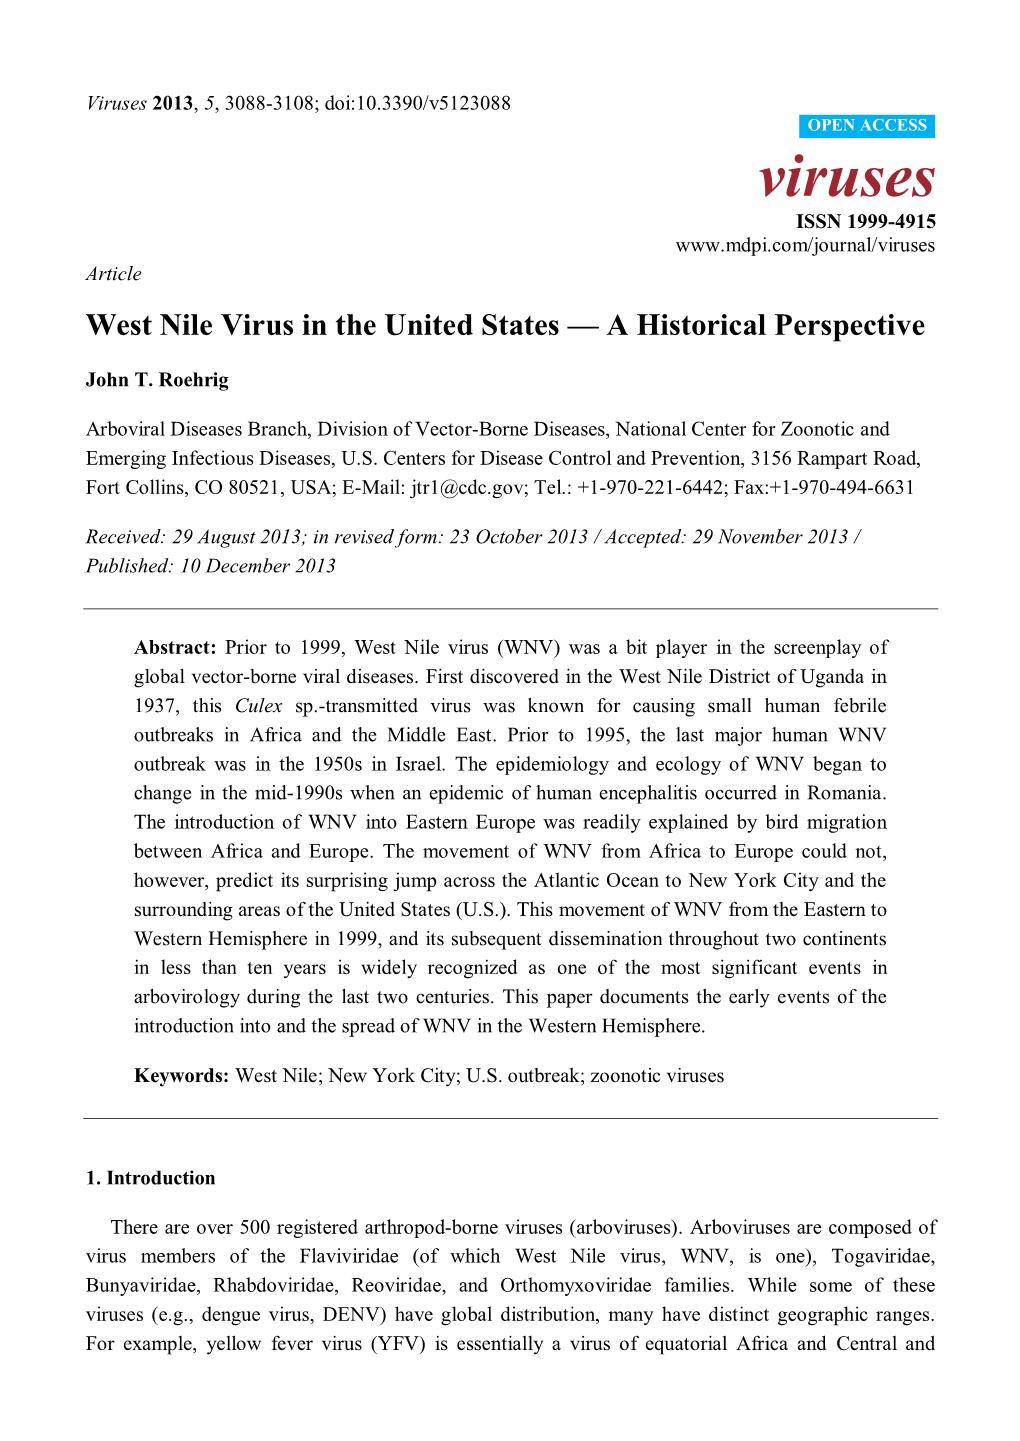 West Nile Virus in the United States — a Historical Perspective